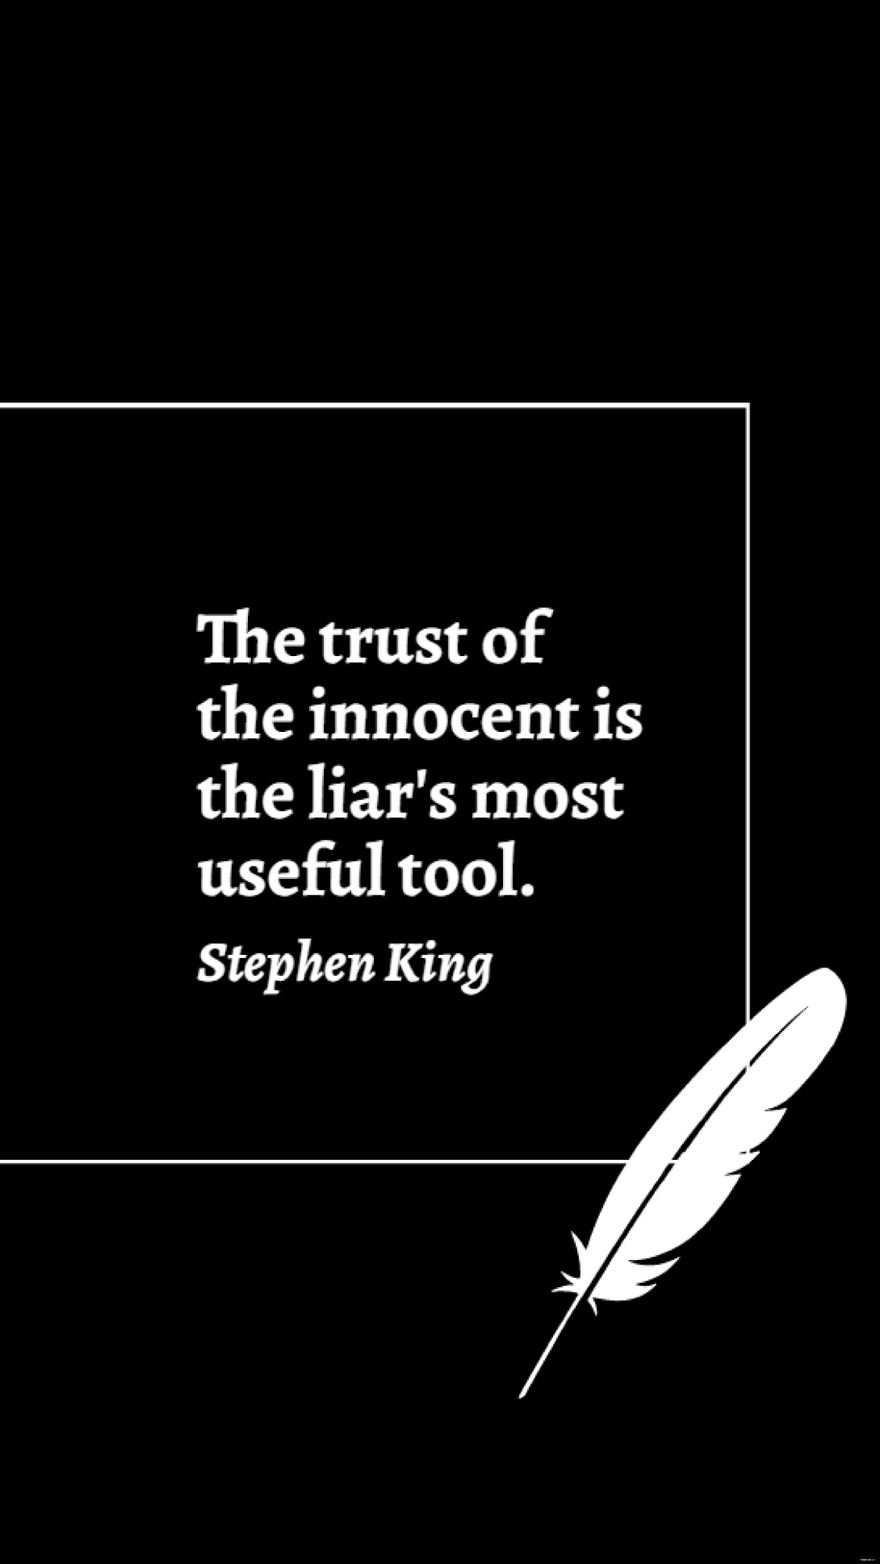 Free Stephen King - The trust of the innocent is the liar's most useful tool. in JPG